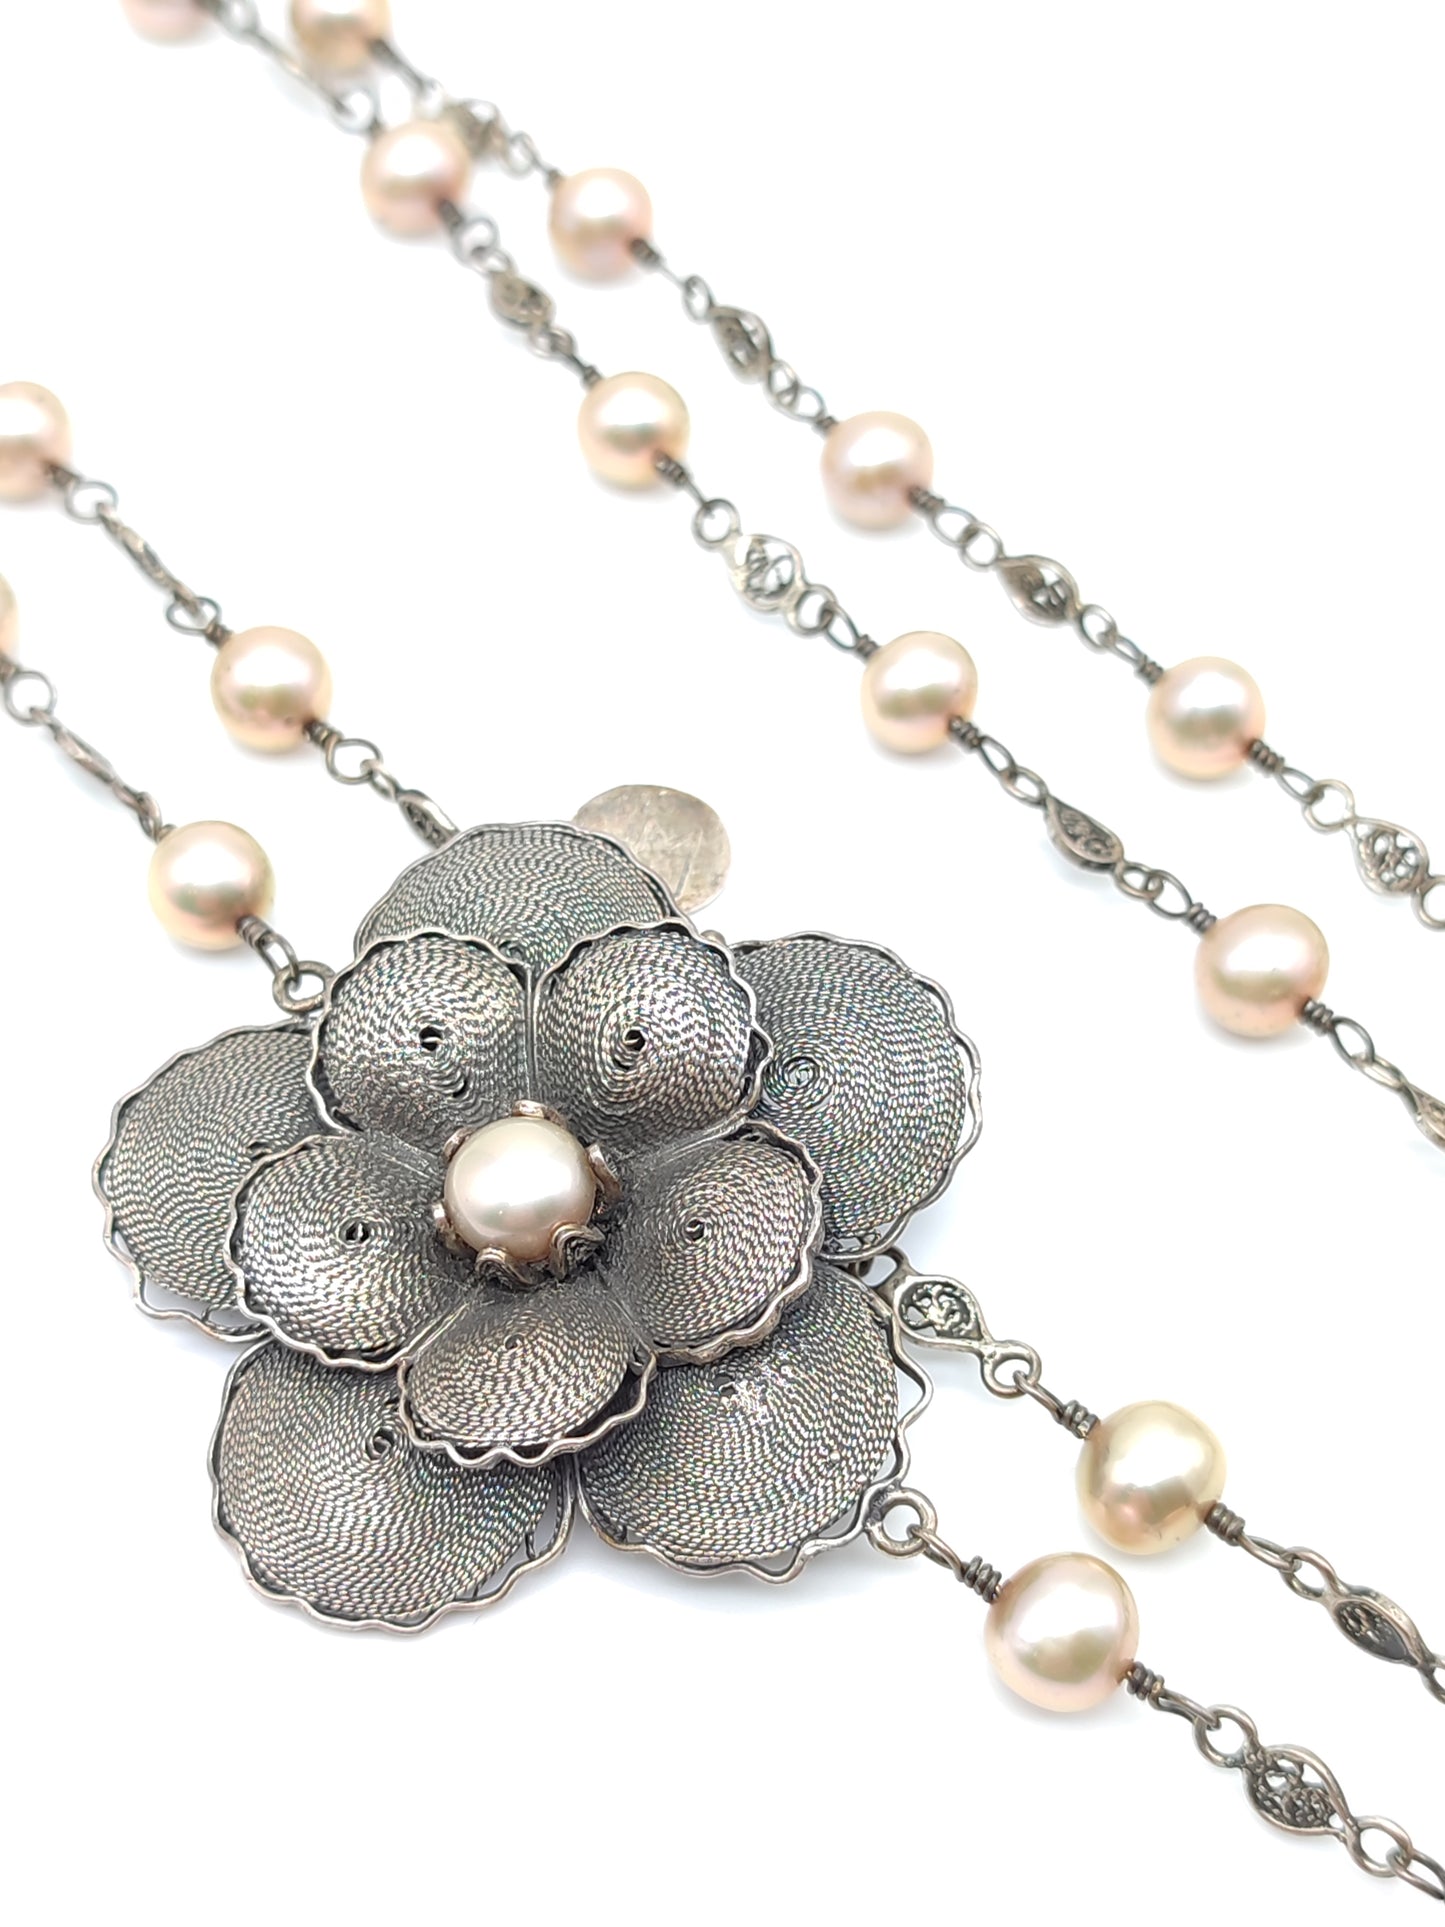 Long silver filigree necklace with pearls and flower